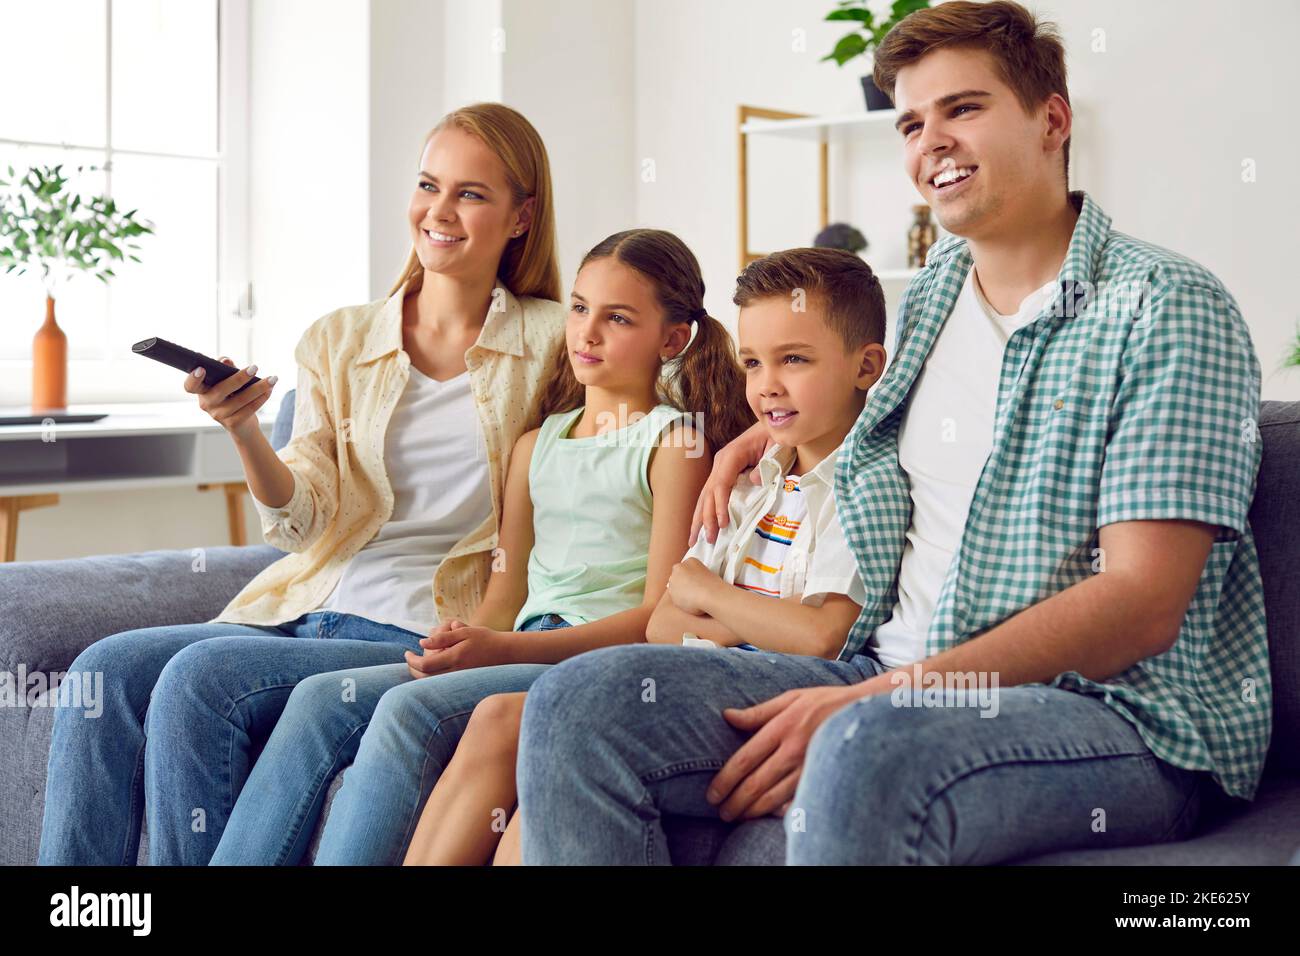 Young cheerful family with children relax watching television programs together. Stock Photo